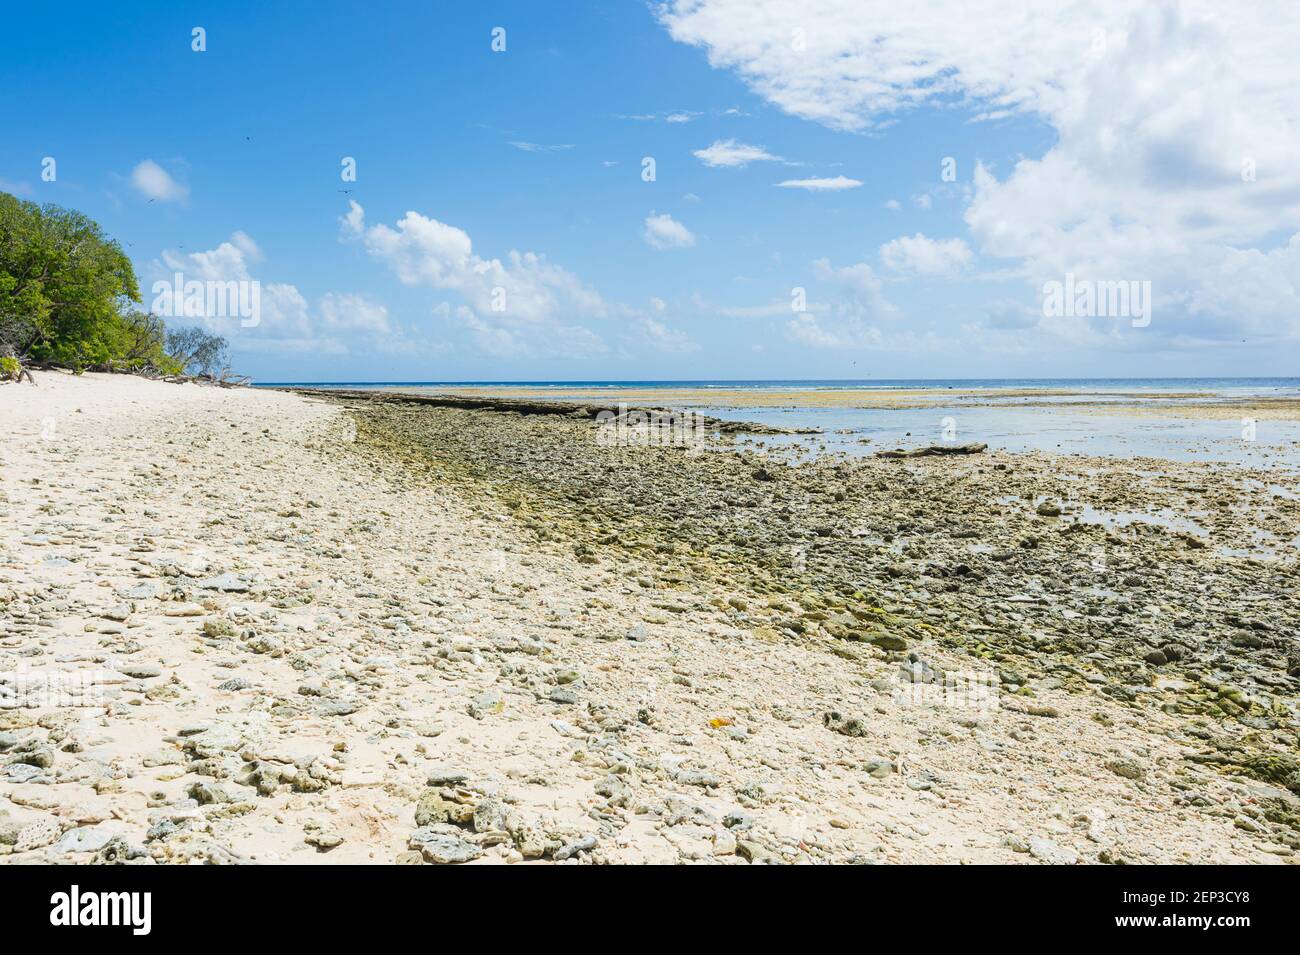 Dead coral litter the beach at the coral cay of Lady Musgrave Island, Southern Great Barrier Reef, Queensland, QLD, Australia Stock Photo